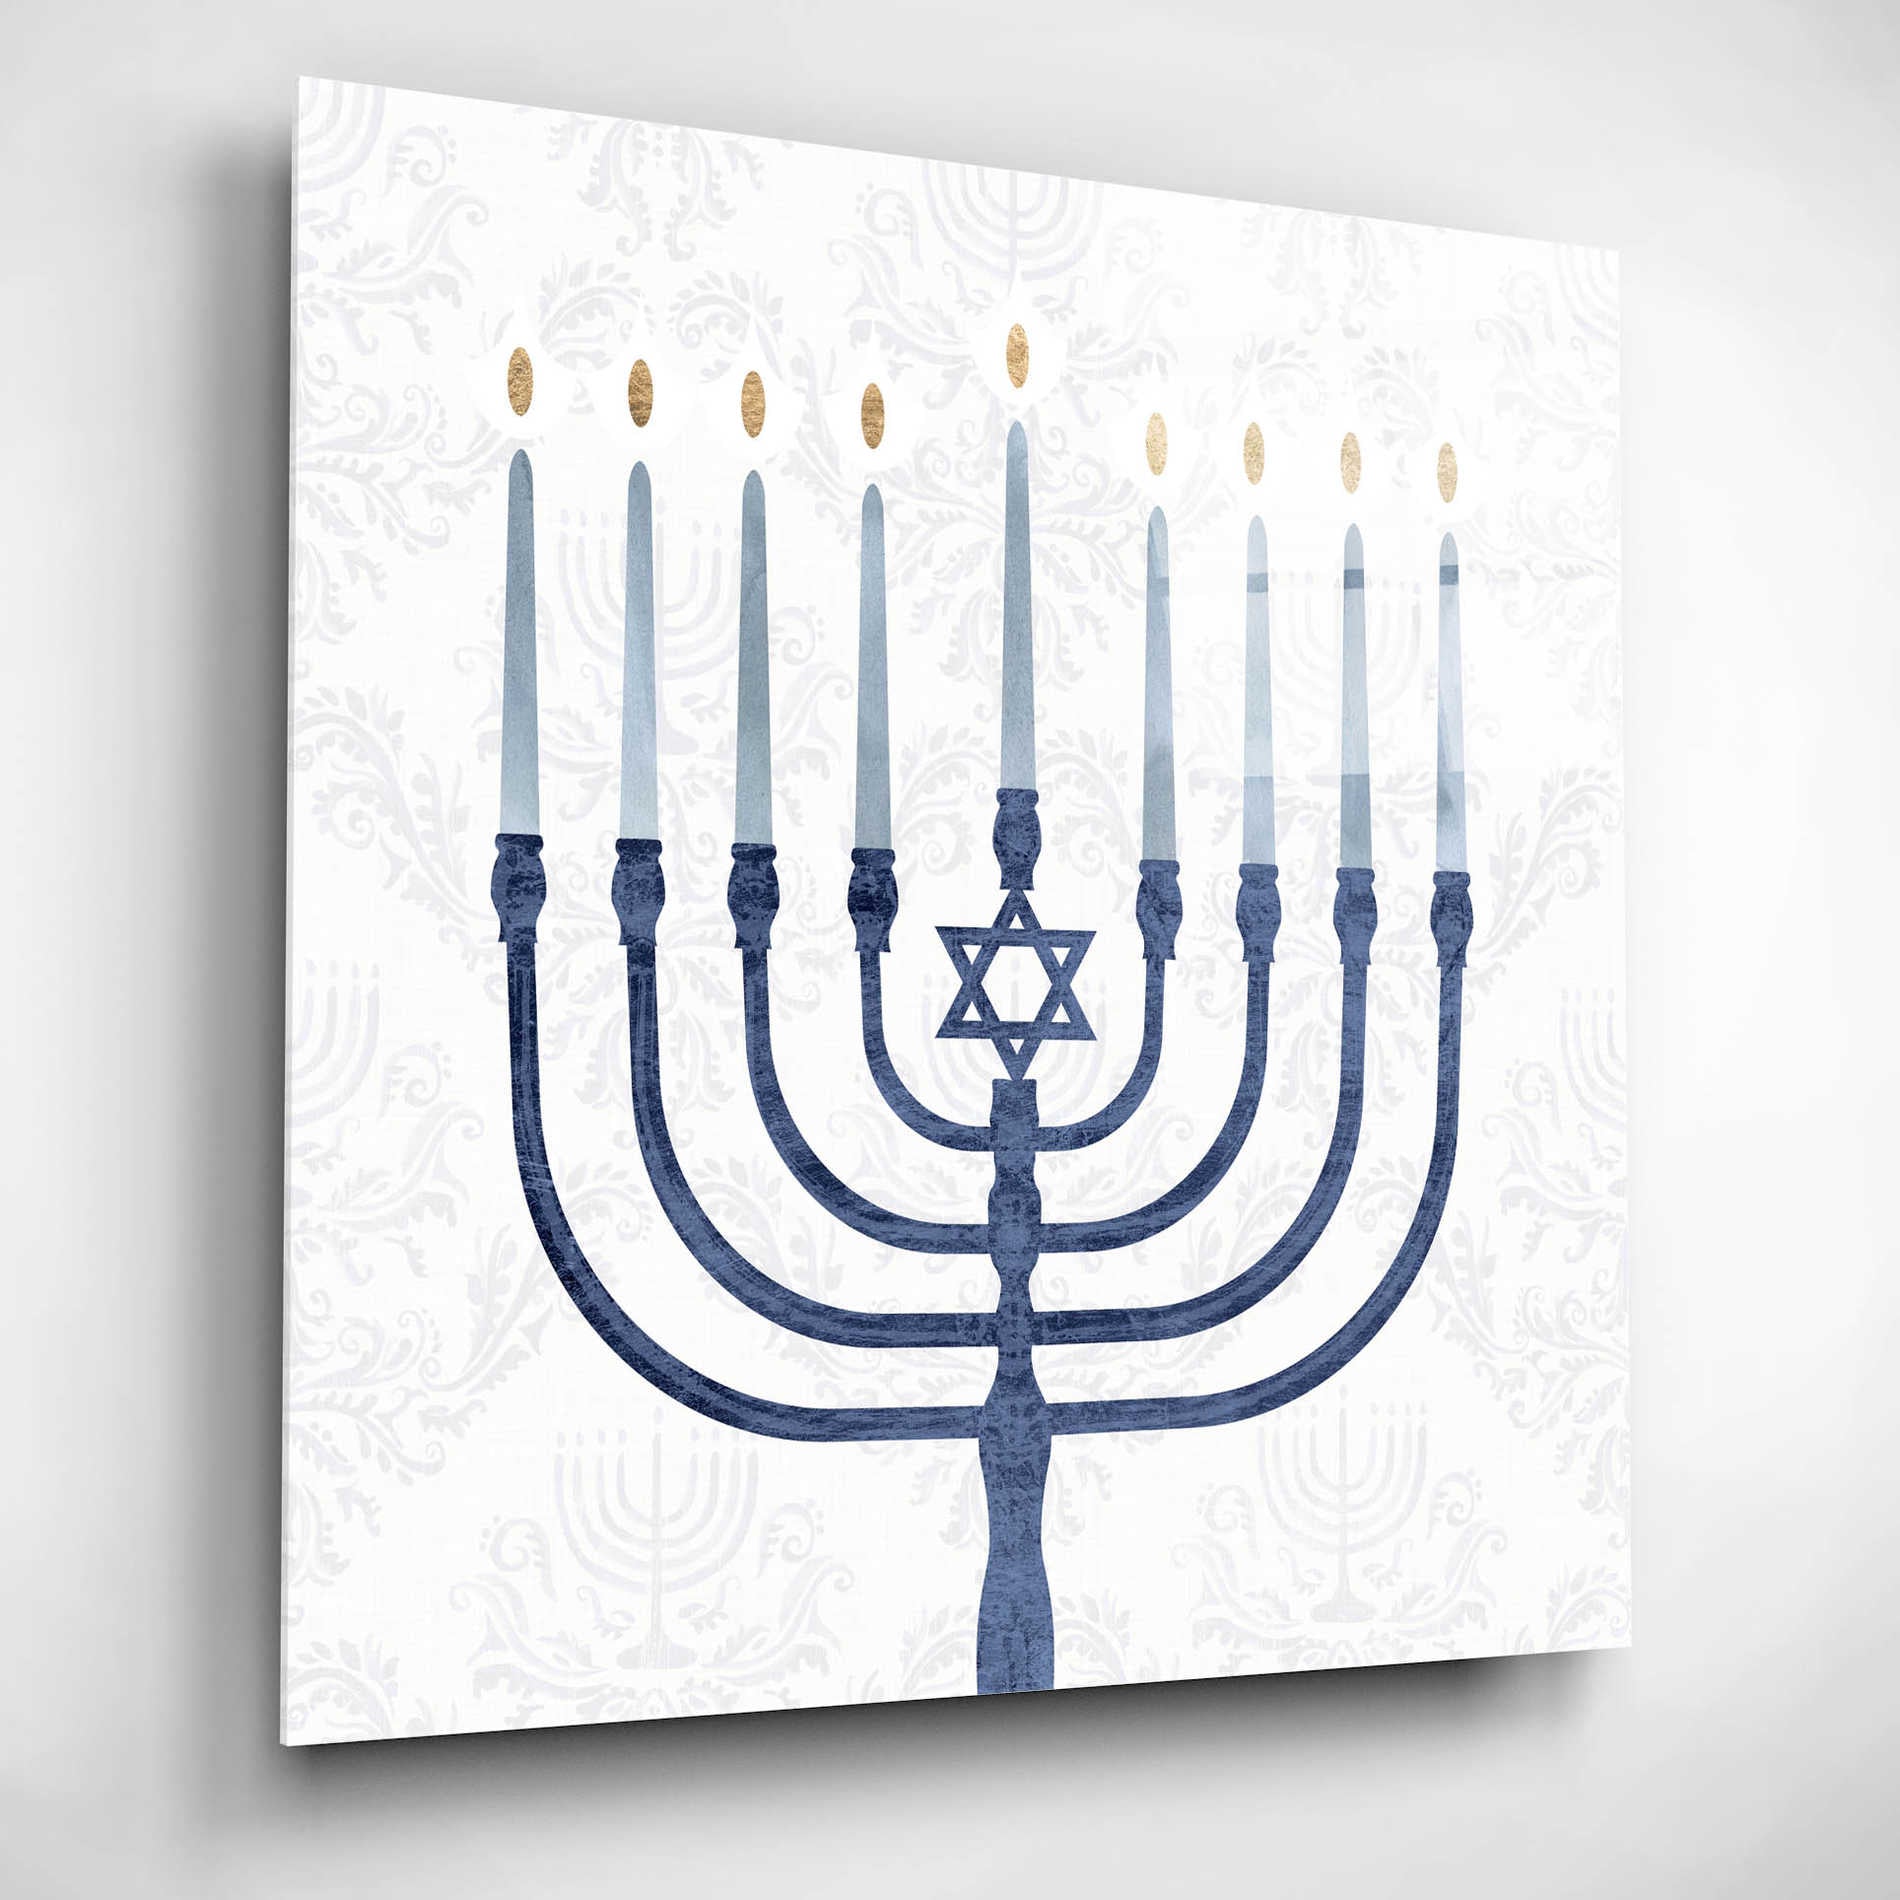 Epic Art 'Sophisticated Hanukkah II' by Victoria Borges, Acrylic Glass Wall Art,12x12